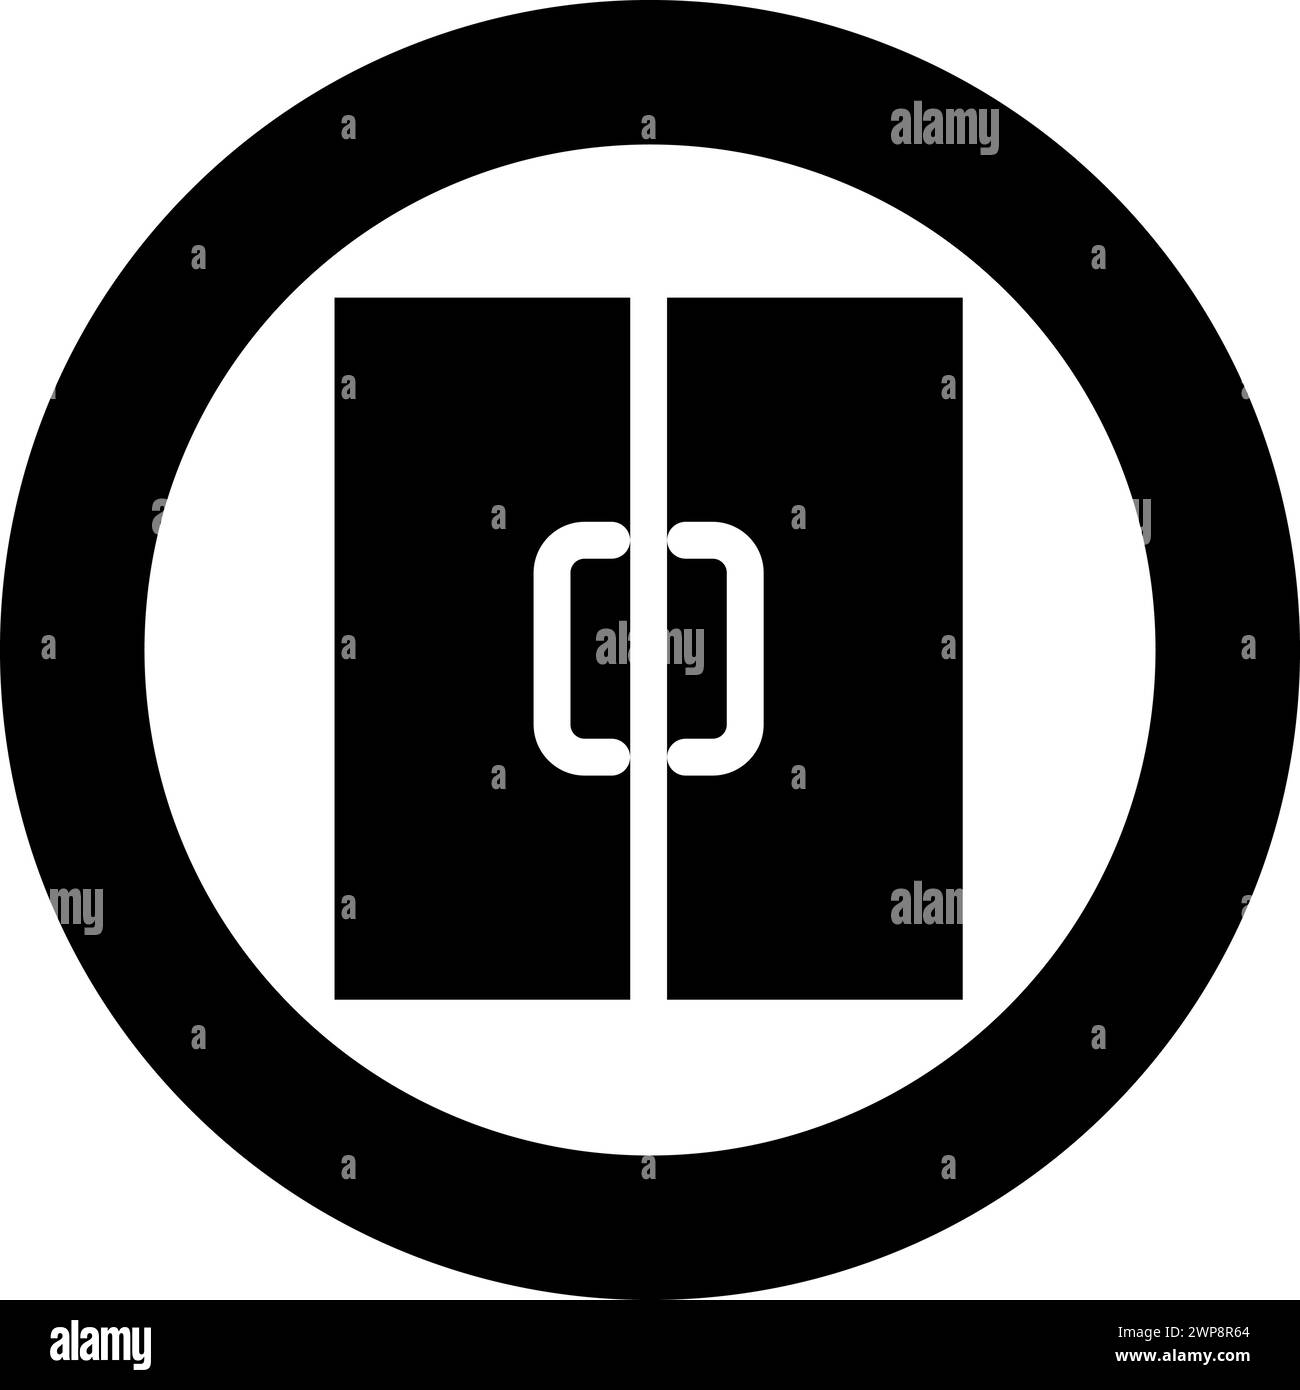 Double door exit doorway icon in circle round black color vector illustration image solid outline style simple Stock Vector